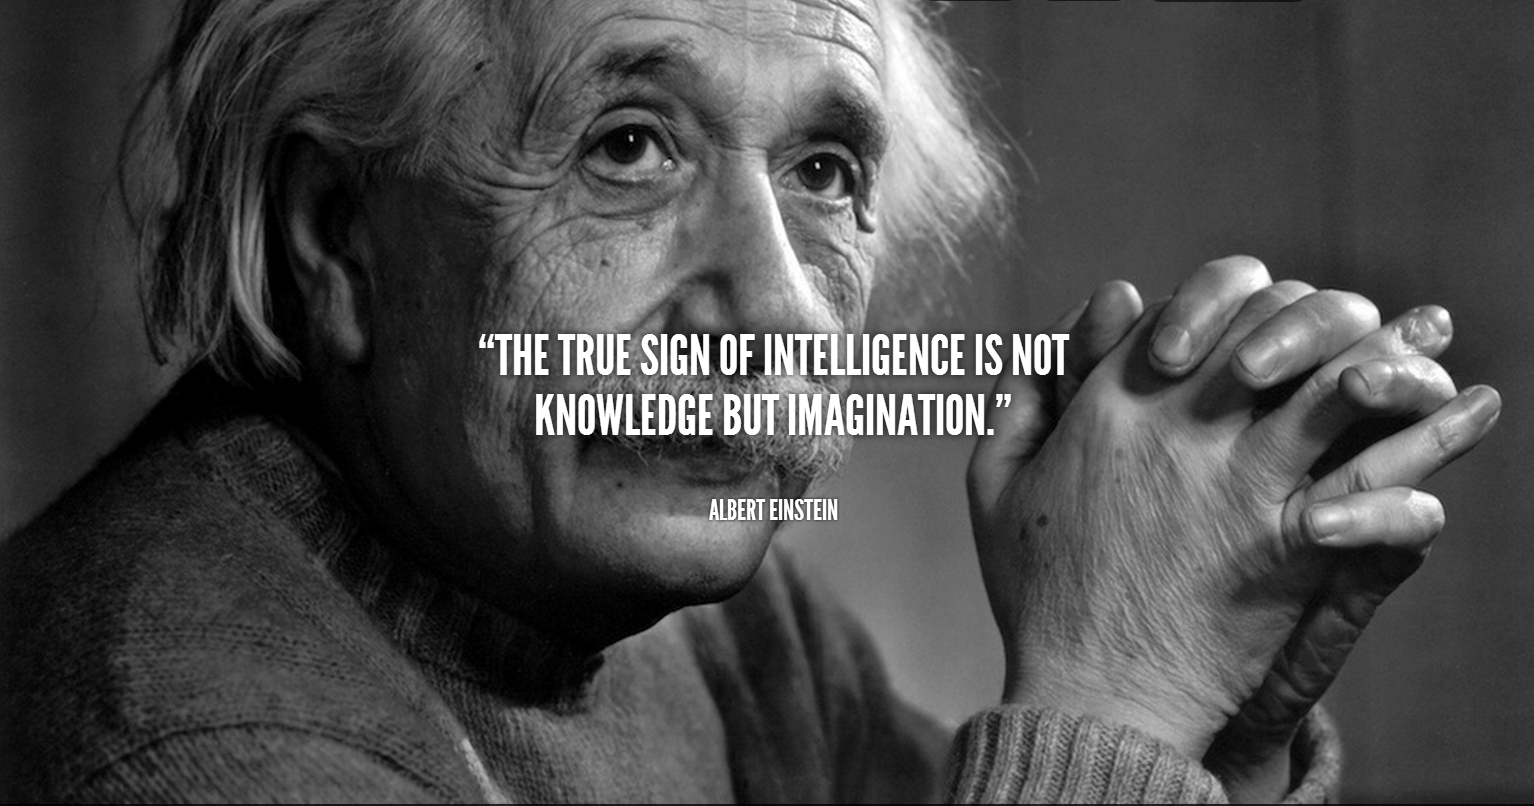 The true sign of intelligence is not knowledge but imagination. Albert Einstein Quote.